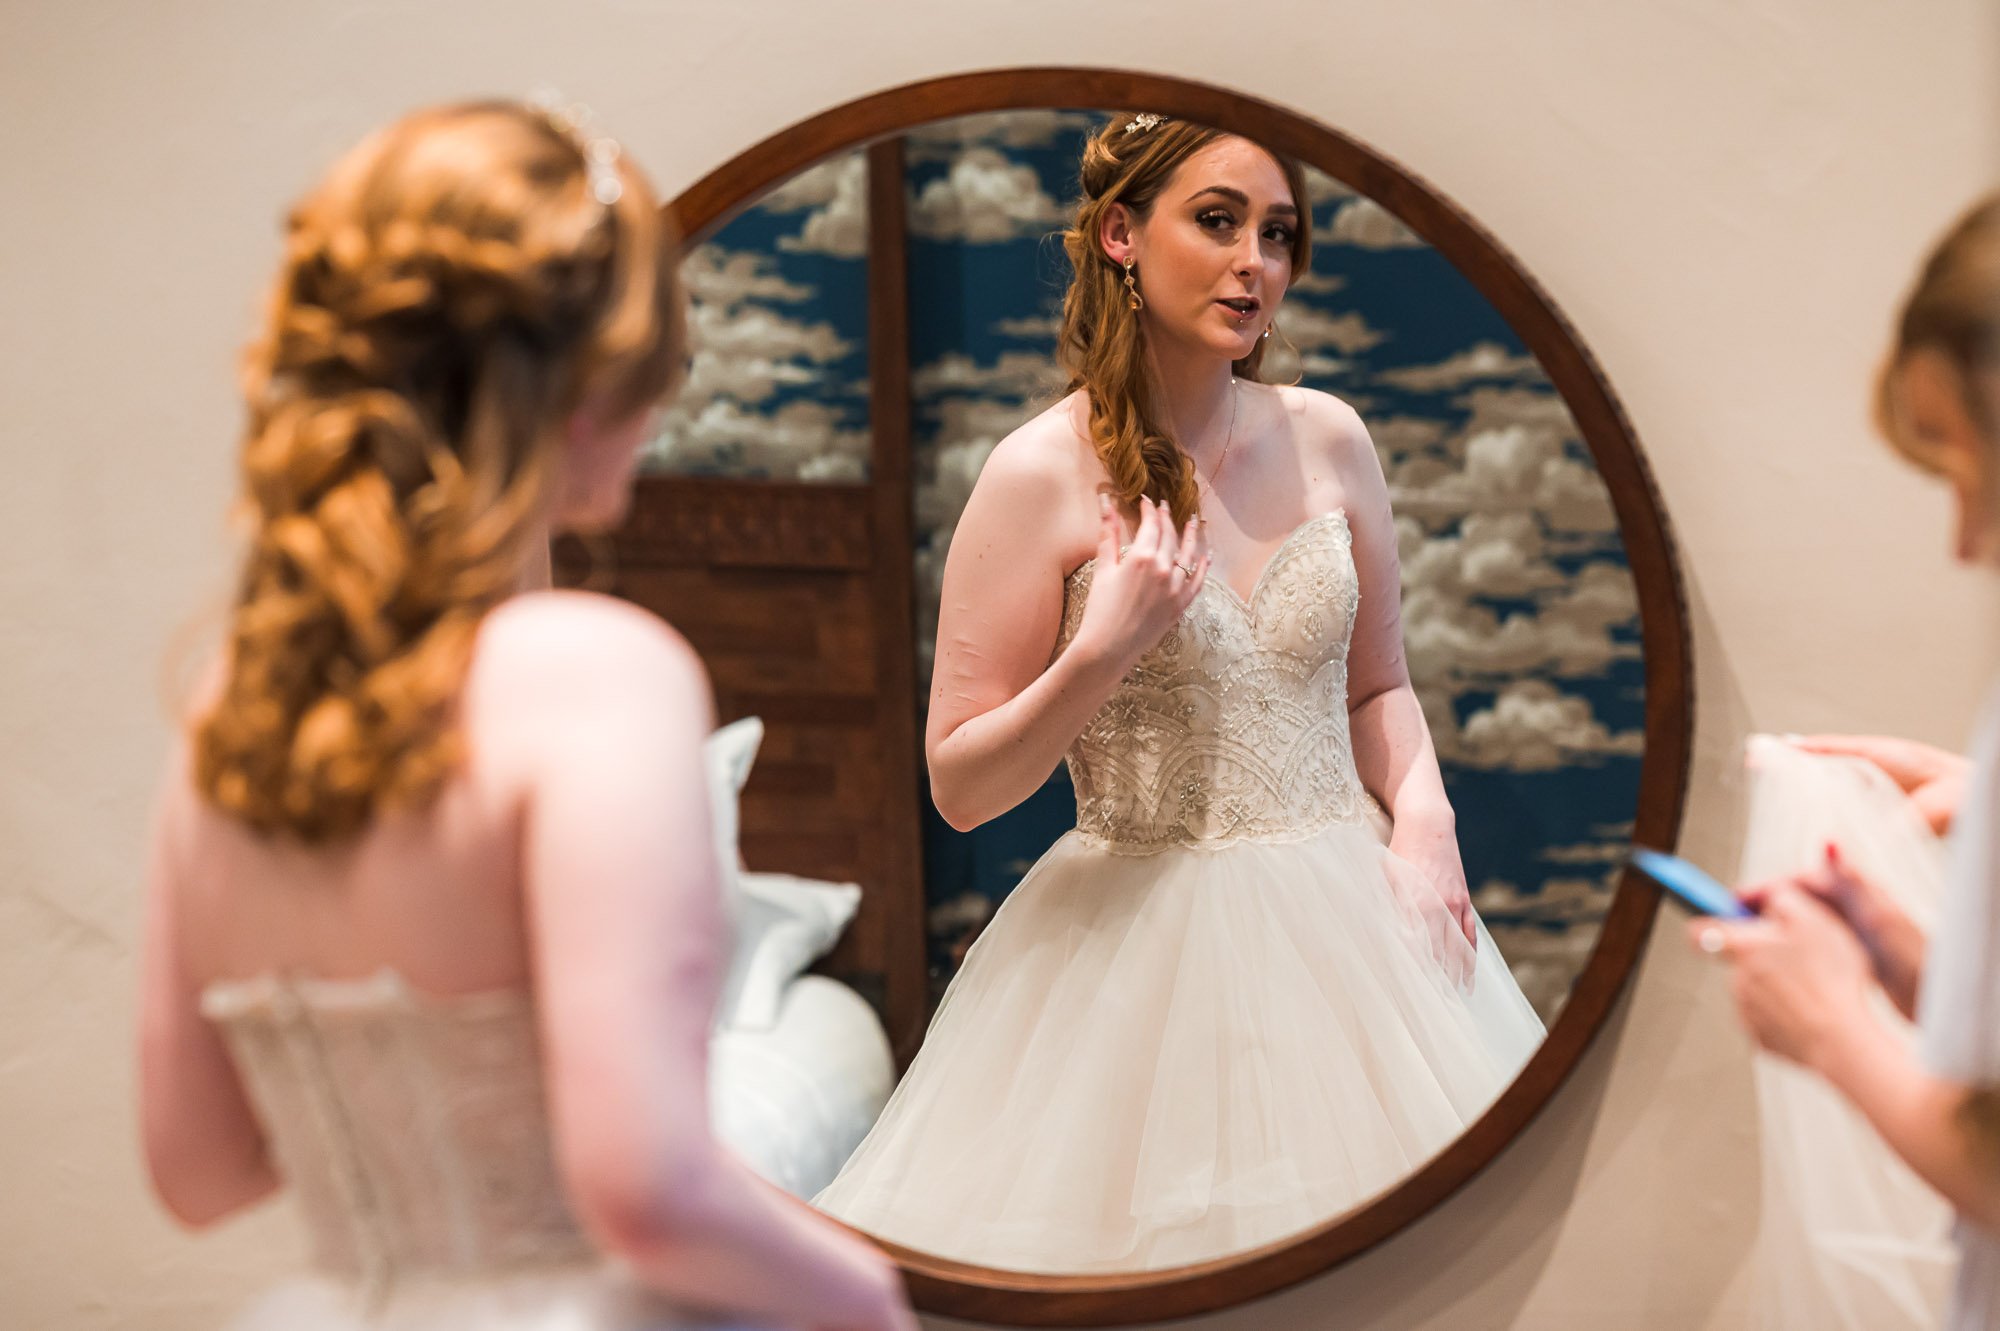 Bride checking herself out in the mirror